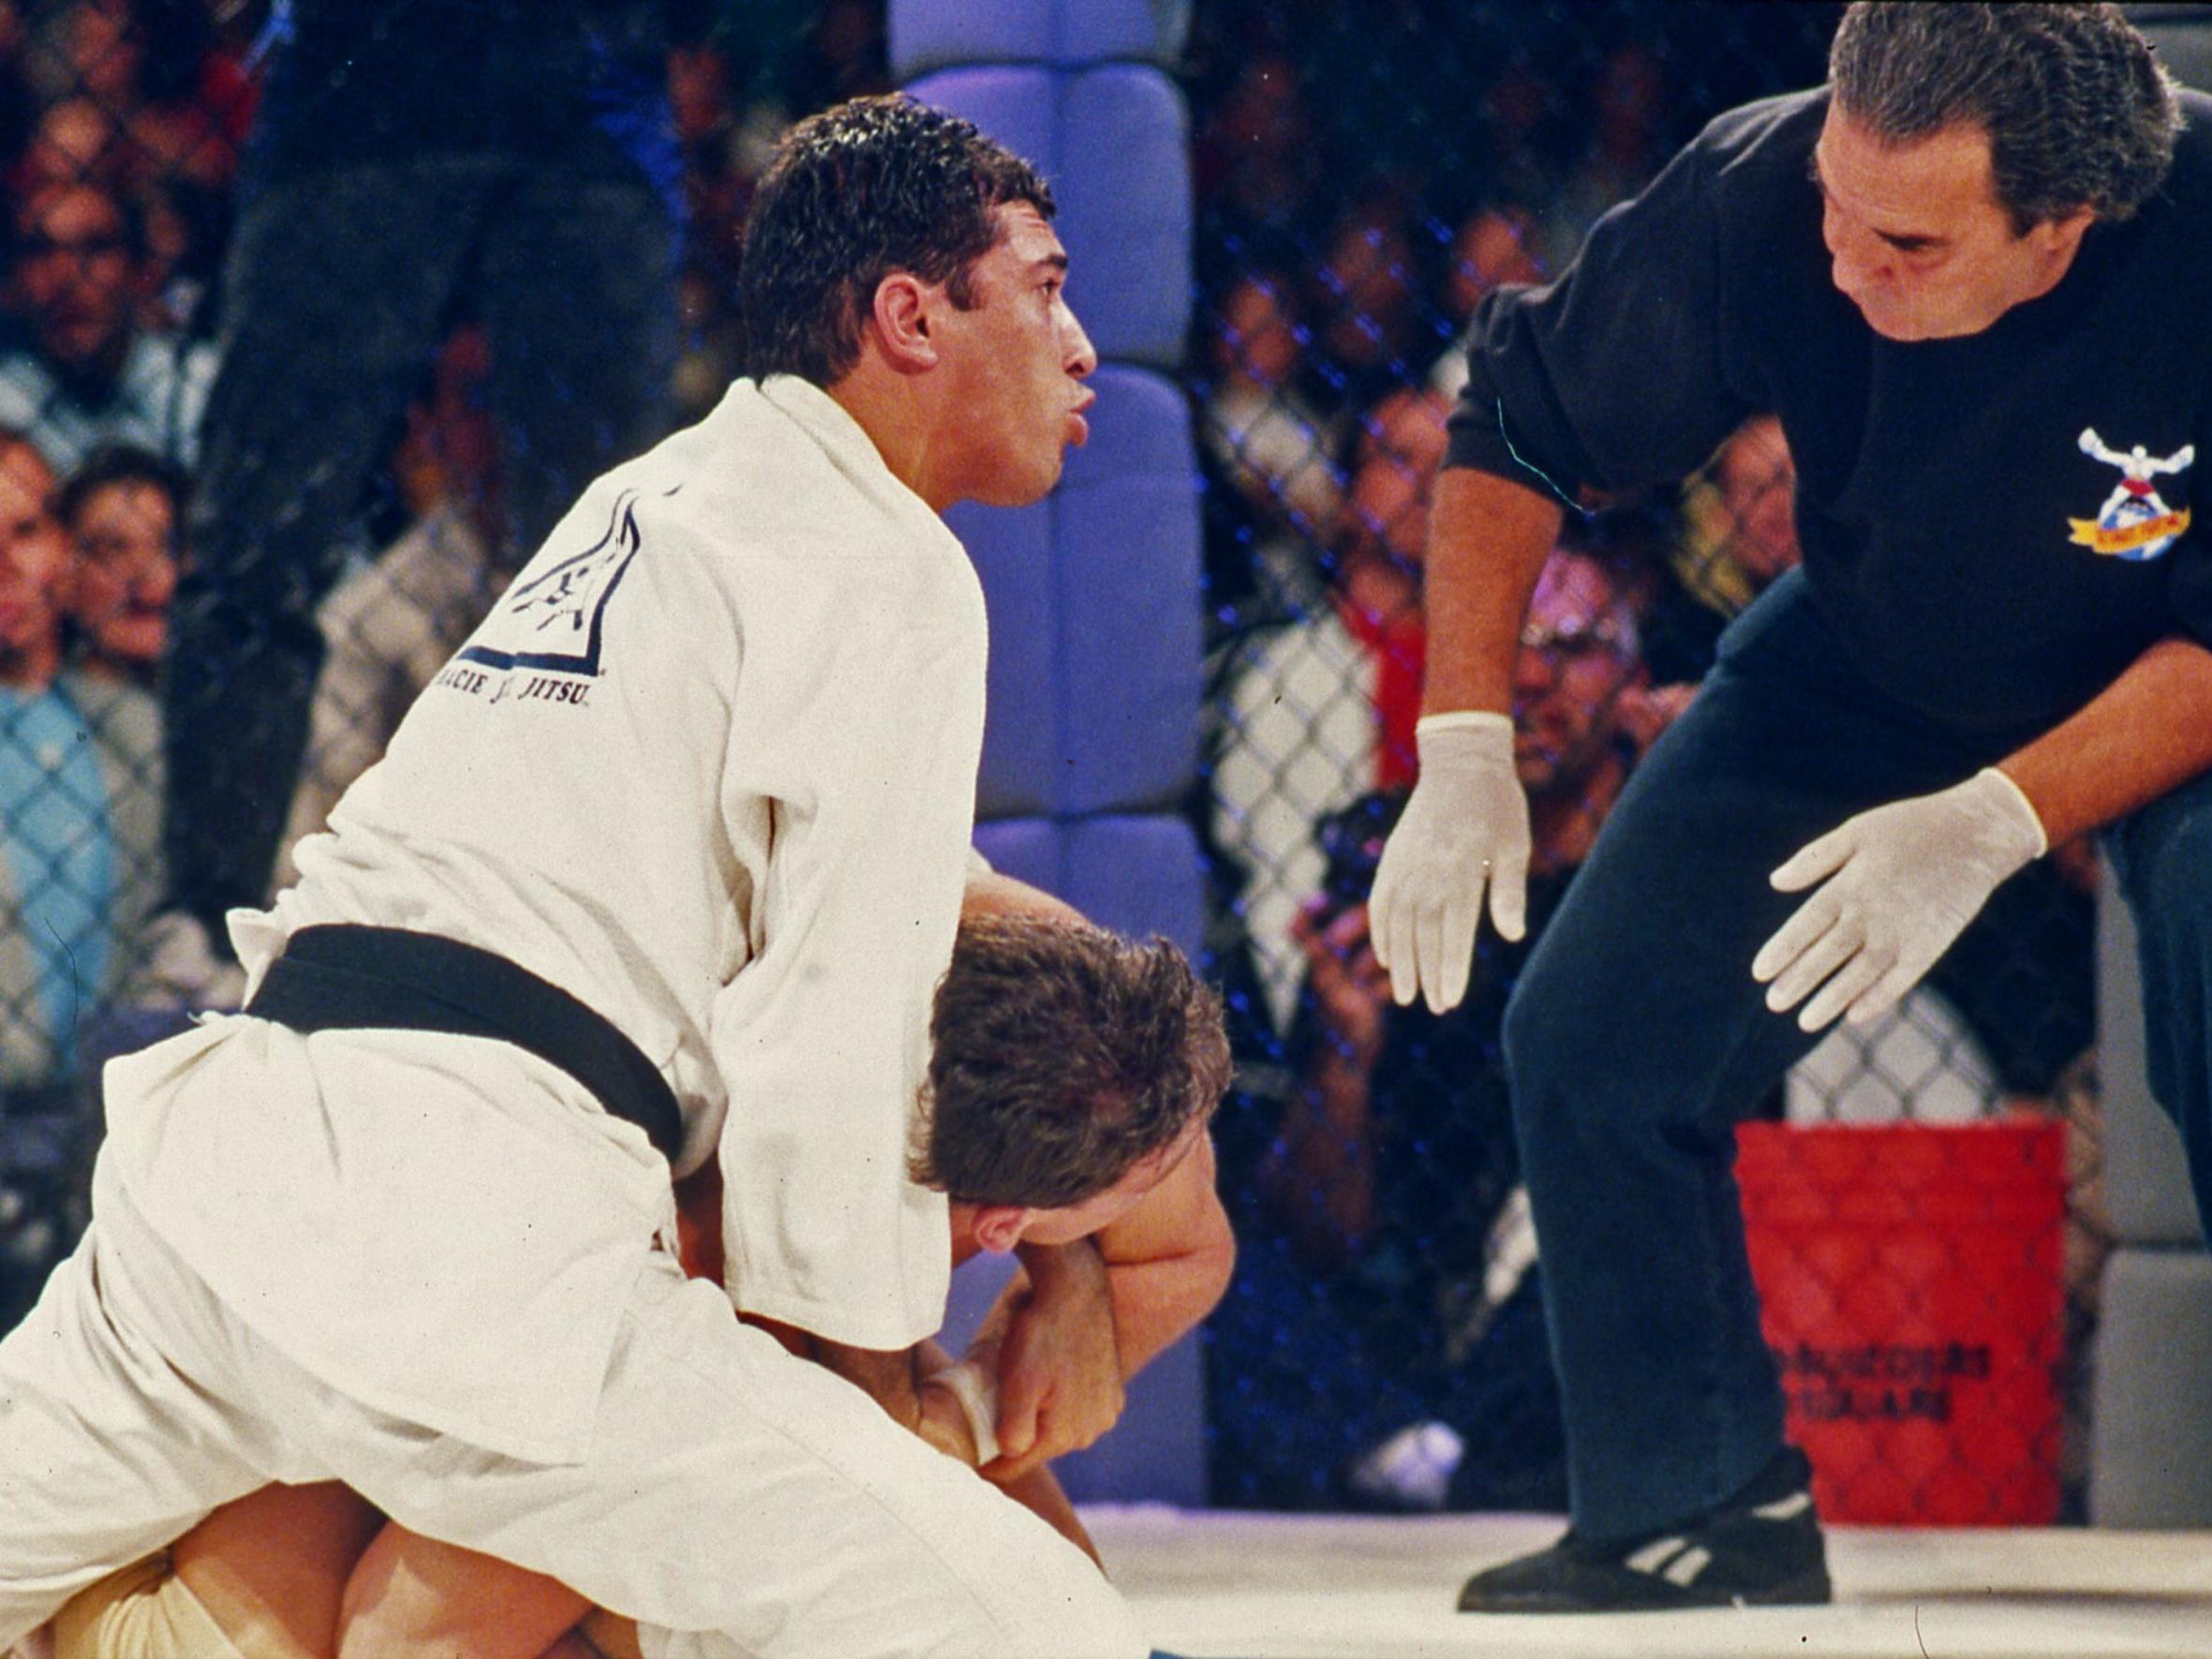 Gracie defeated Shamrock at UFC 1 and later fought the American twice more